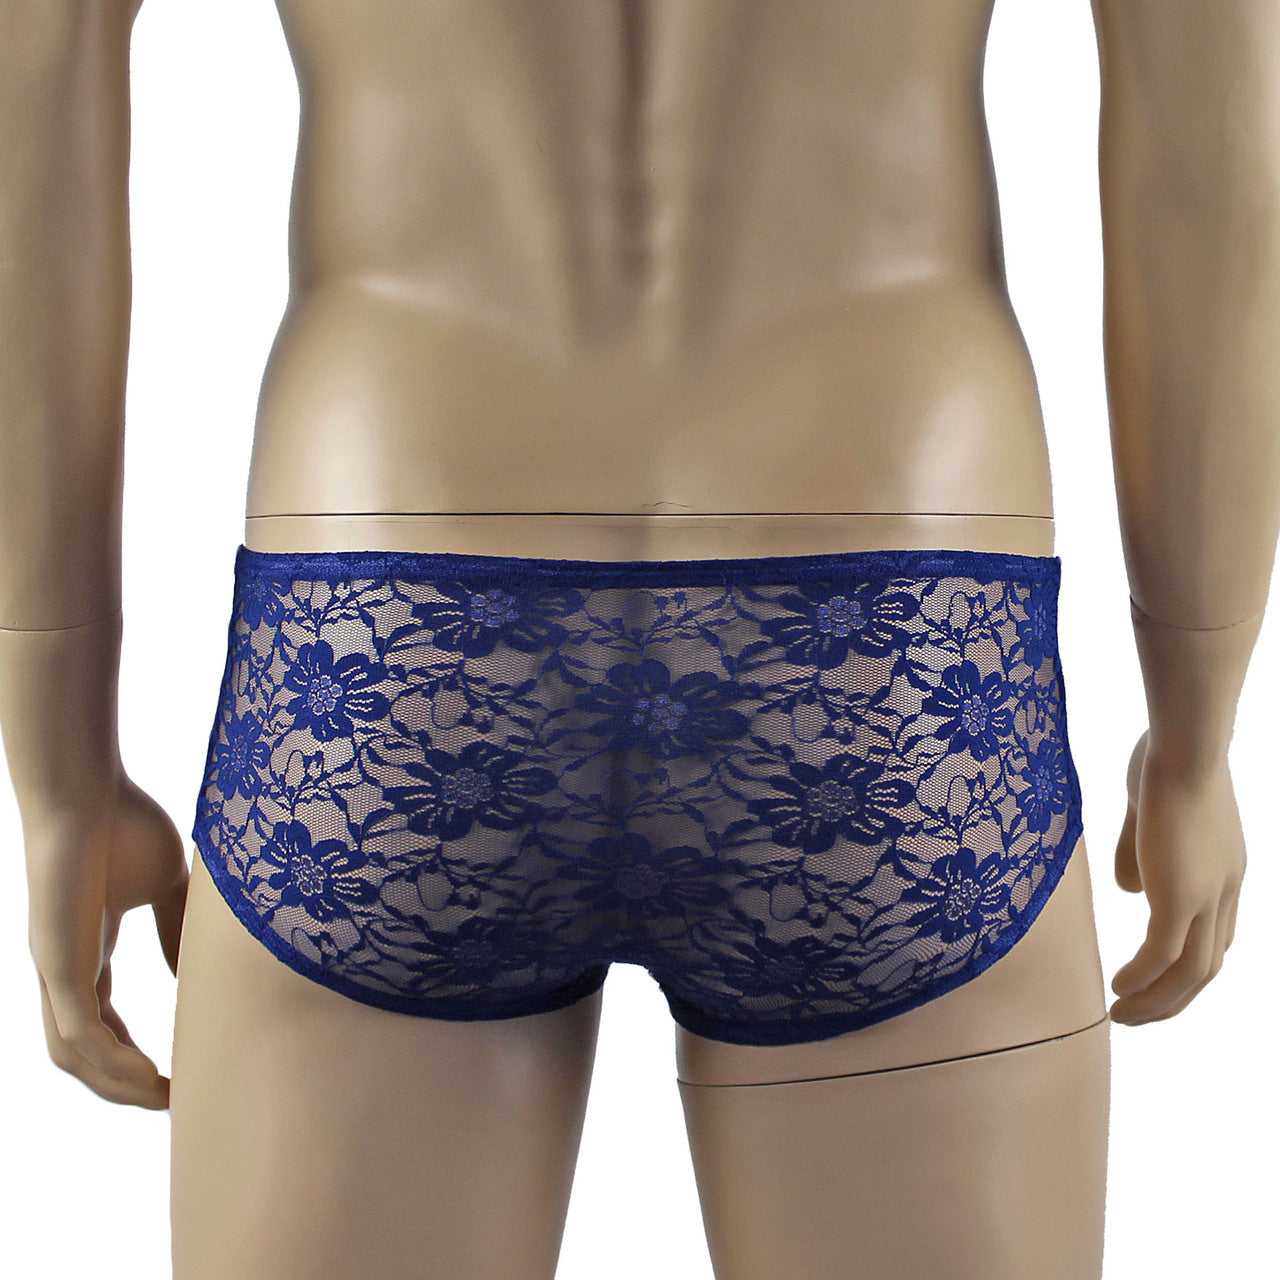 Mens Lingerie Stretch Lace  Male Panty Bikini Brief (navy plus other colours)